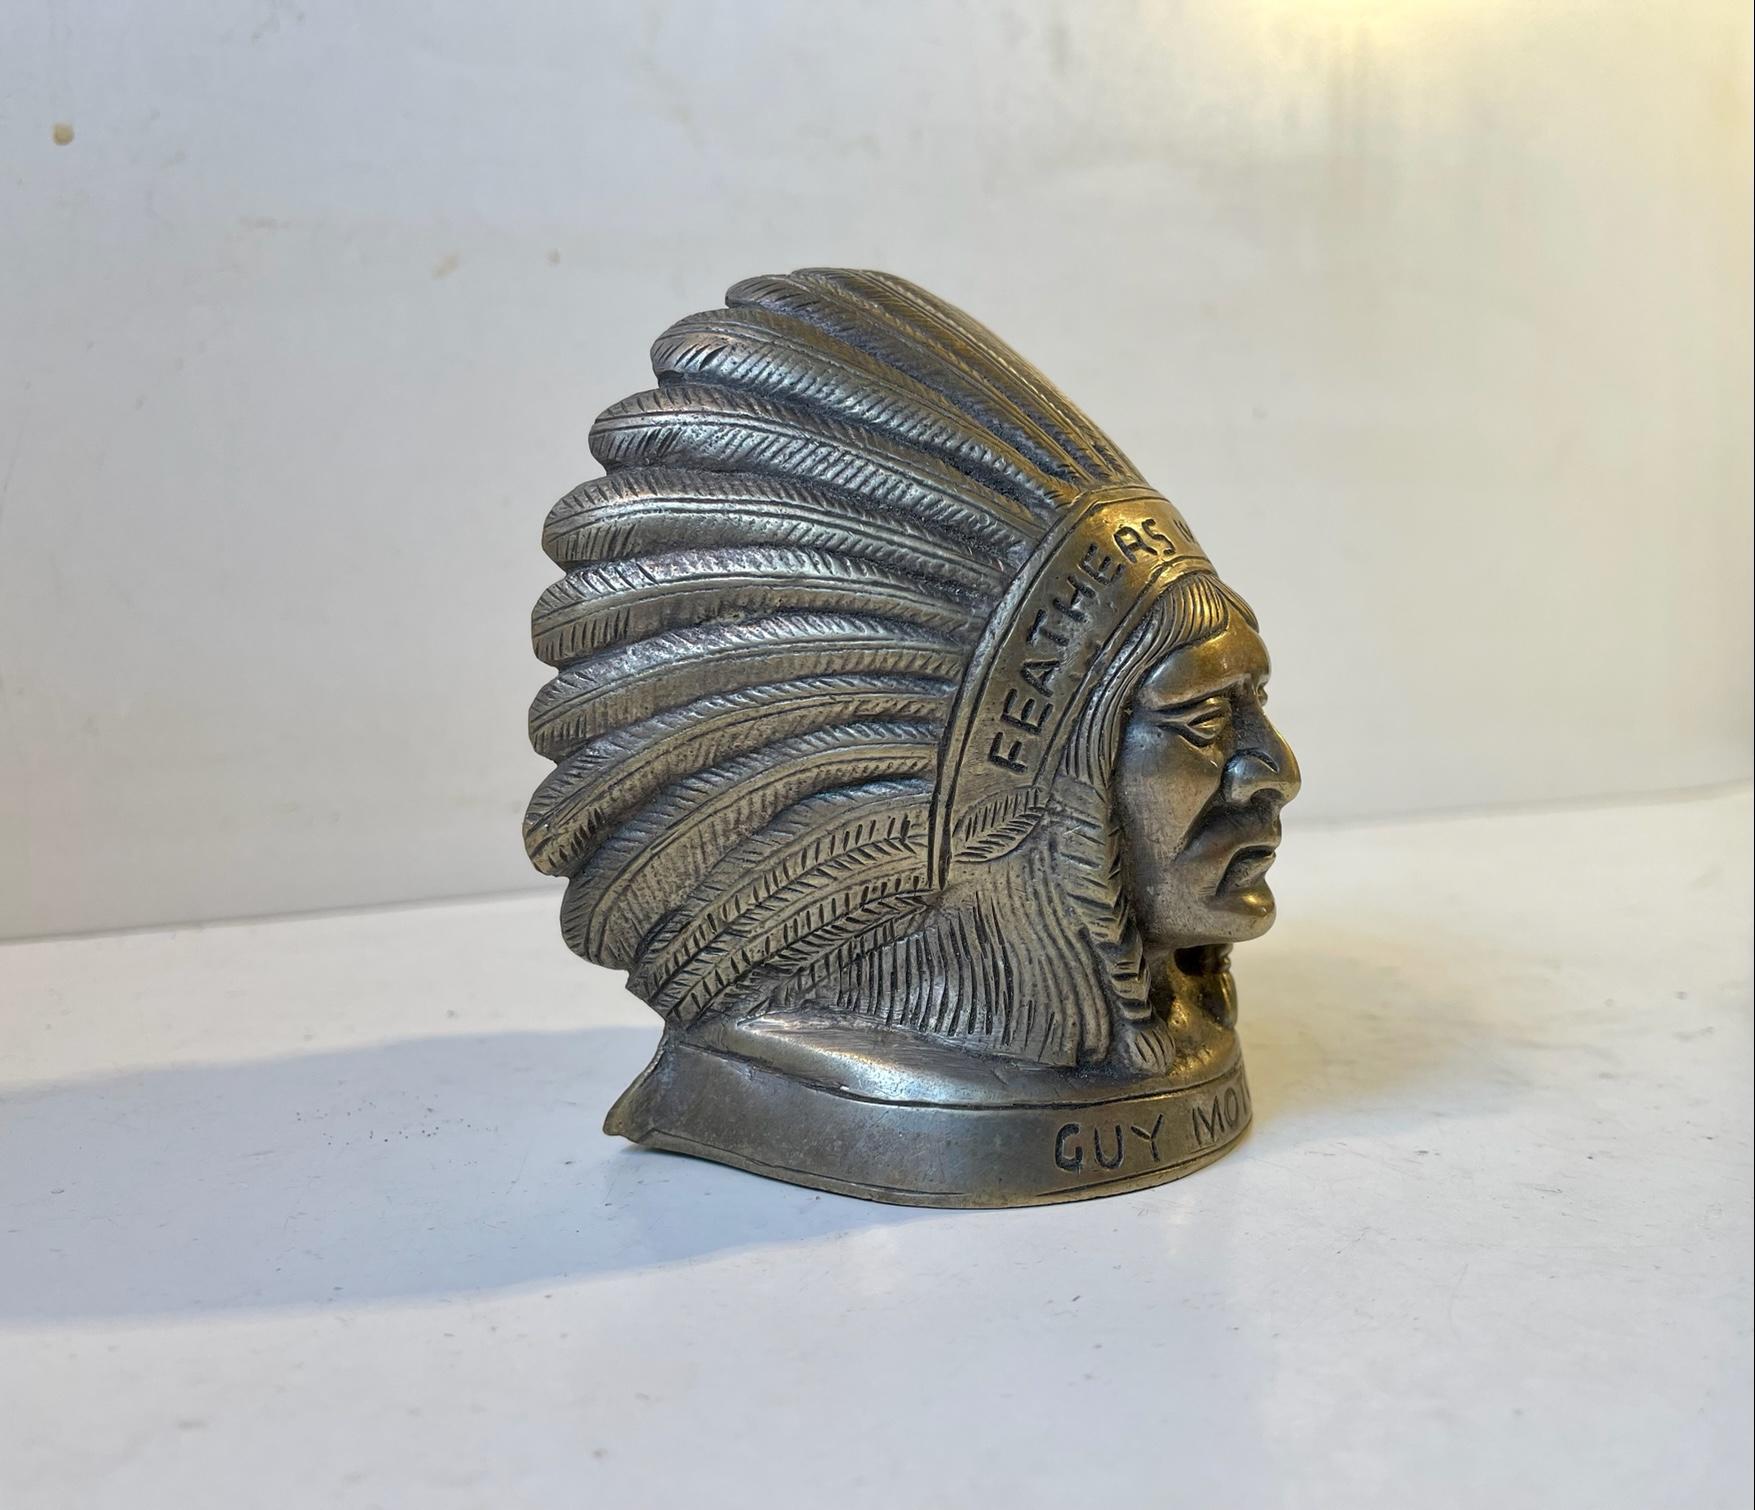 Original hood ornament / mascot depicting an Indian Chief in full head dress, entitled and inscribed 